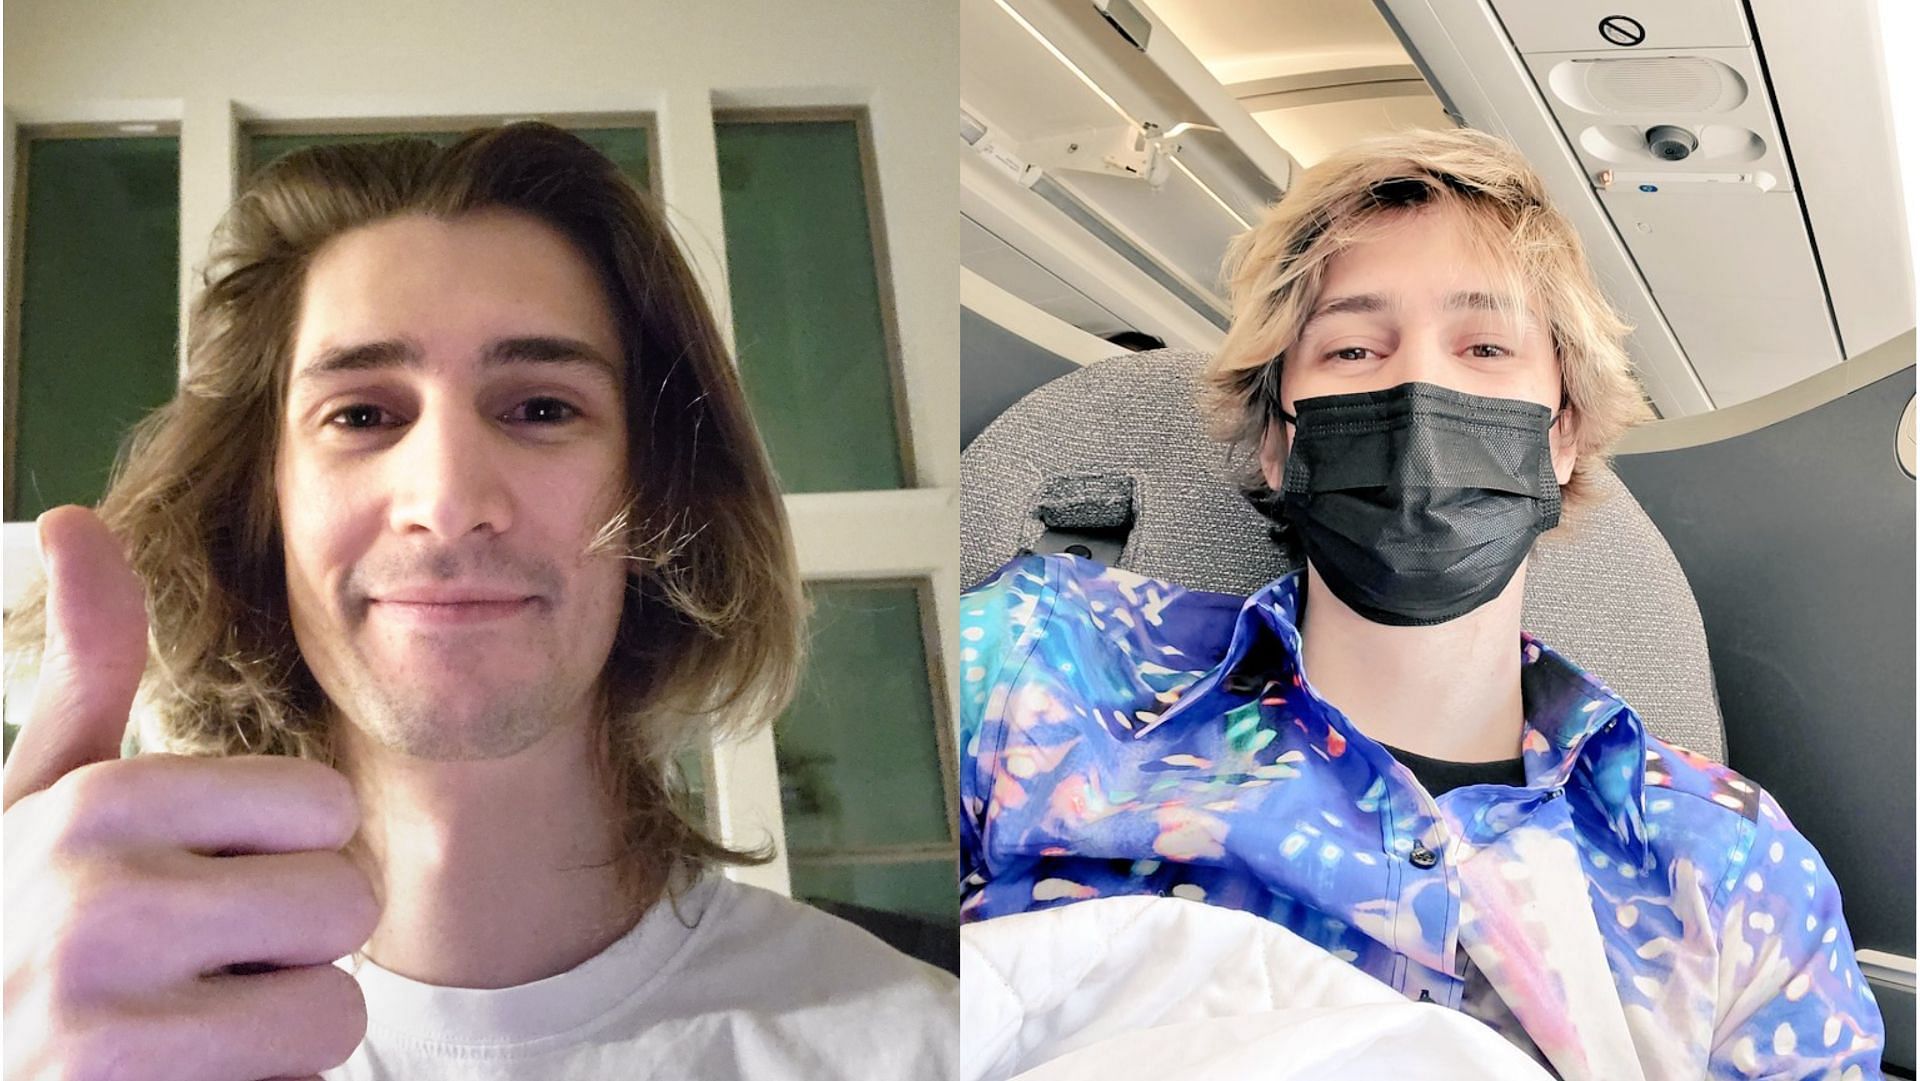 Twitch streamer xQc fires back at racism accusations (Image via xQc/Instagram)